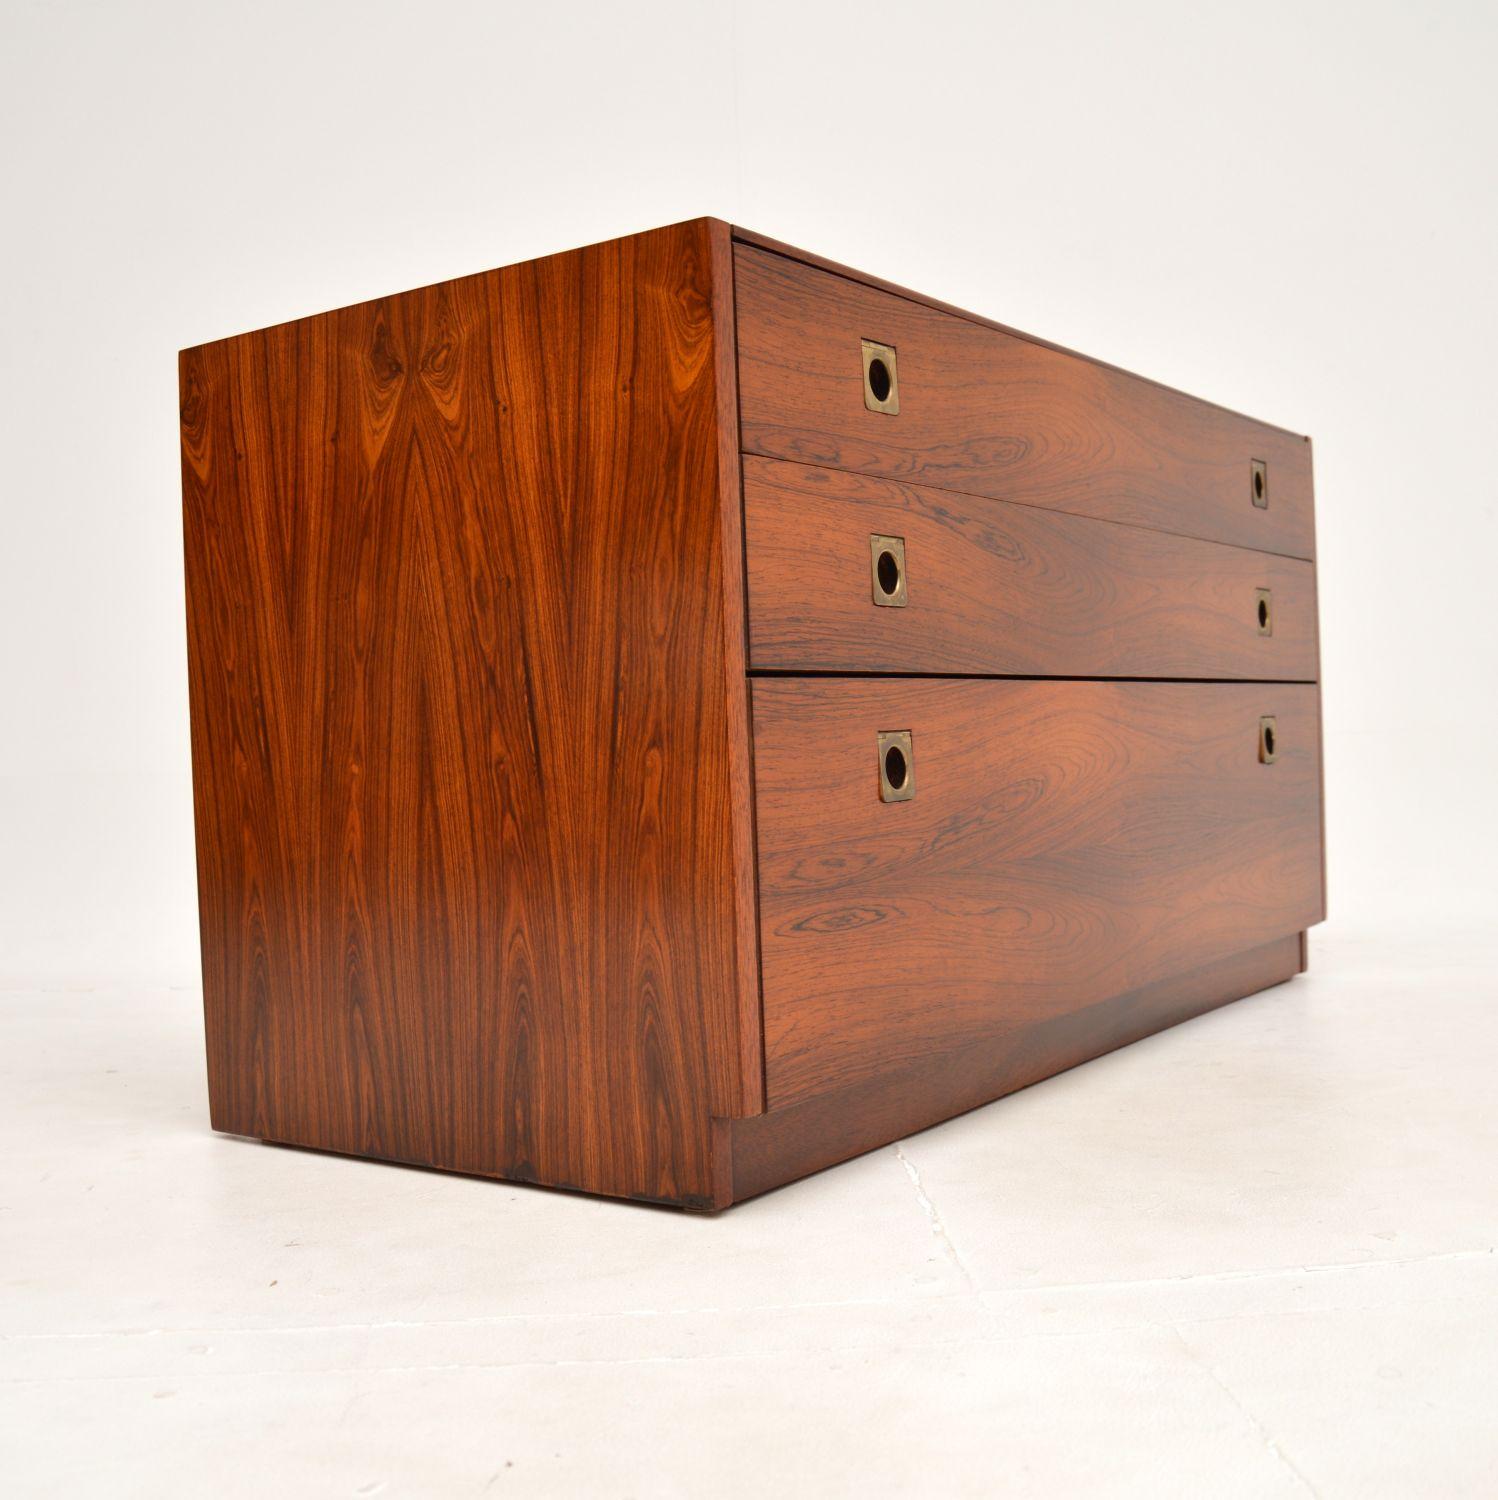 British Vintage Low Chest of Drawers by Robert Heritage for Archie Shine